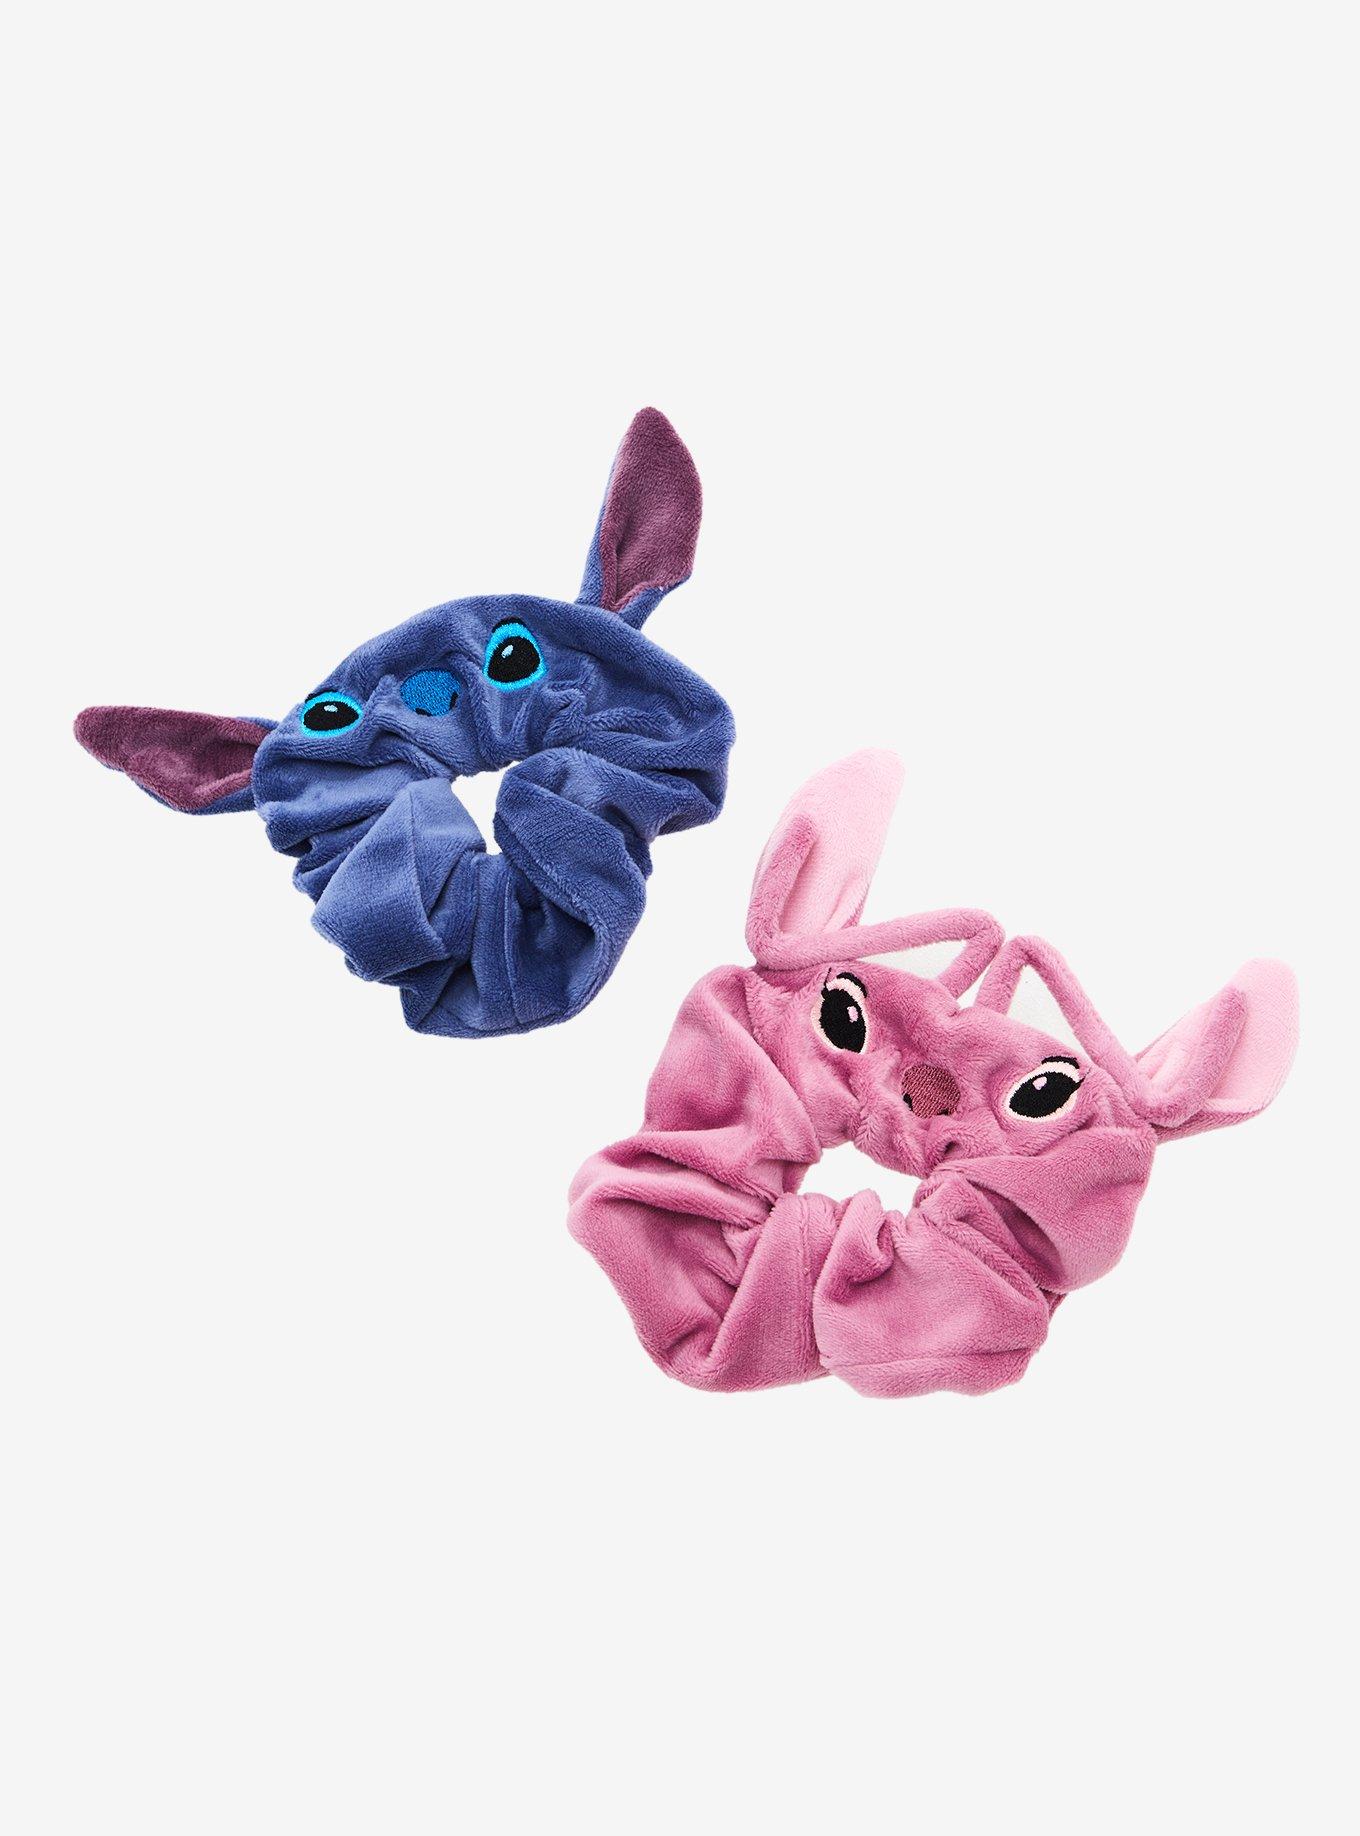  Lilo and Stitch Hair Accessories Set - Bundle with Stitch Hair  Scrunchies, Sticker Earrings, Hair Brush, Tattoos, and More